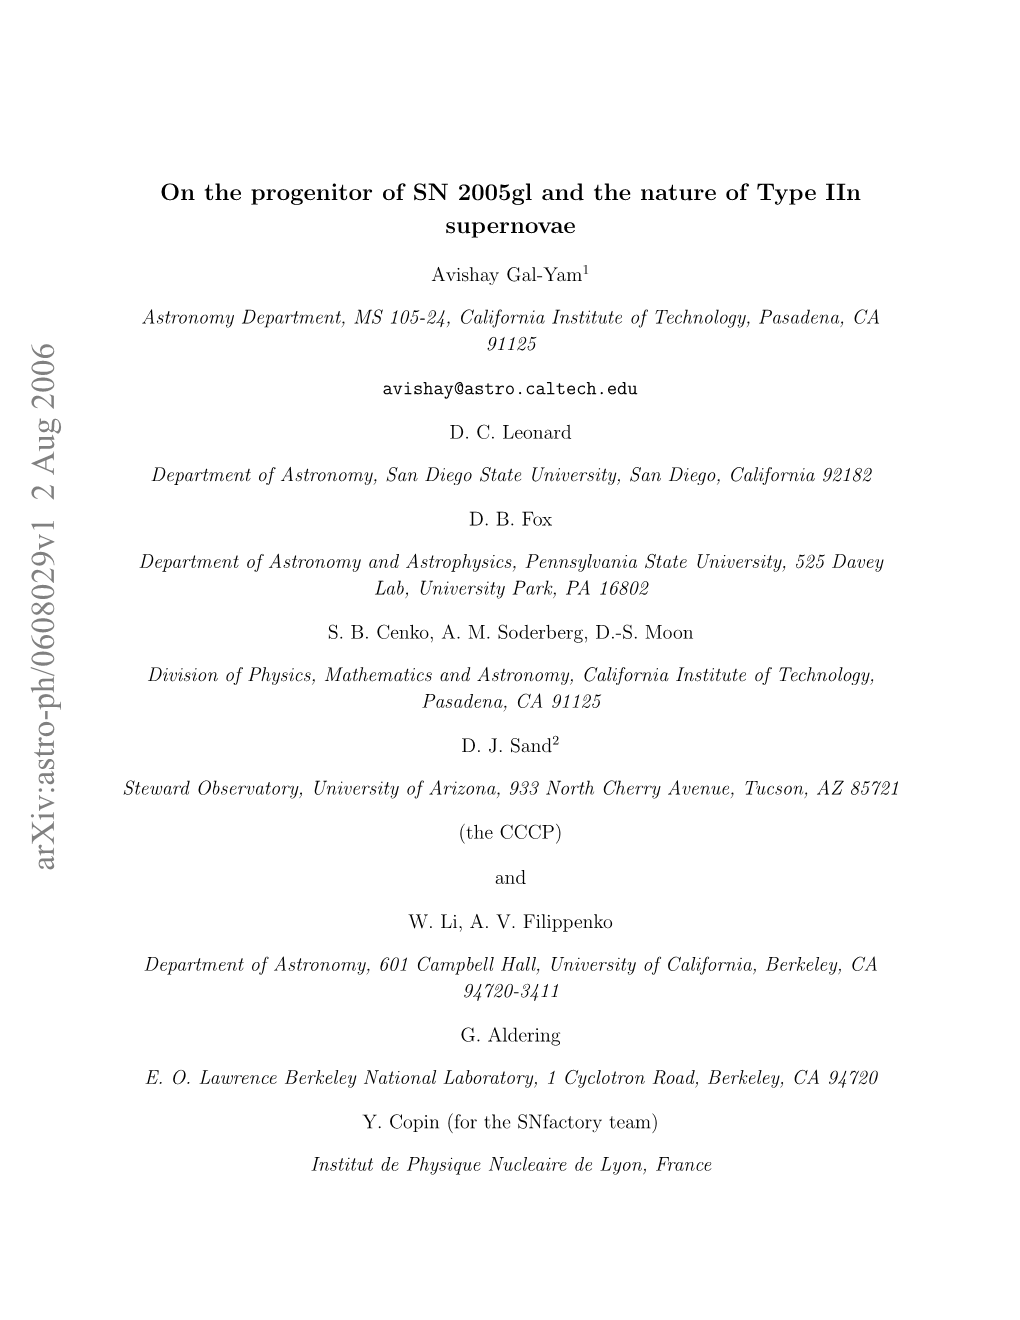 On the Progenitor of SN 2005Gl and the Nature of Type Iin Supernovae